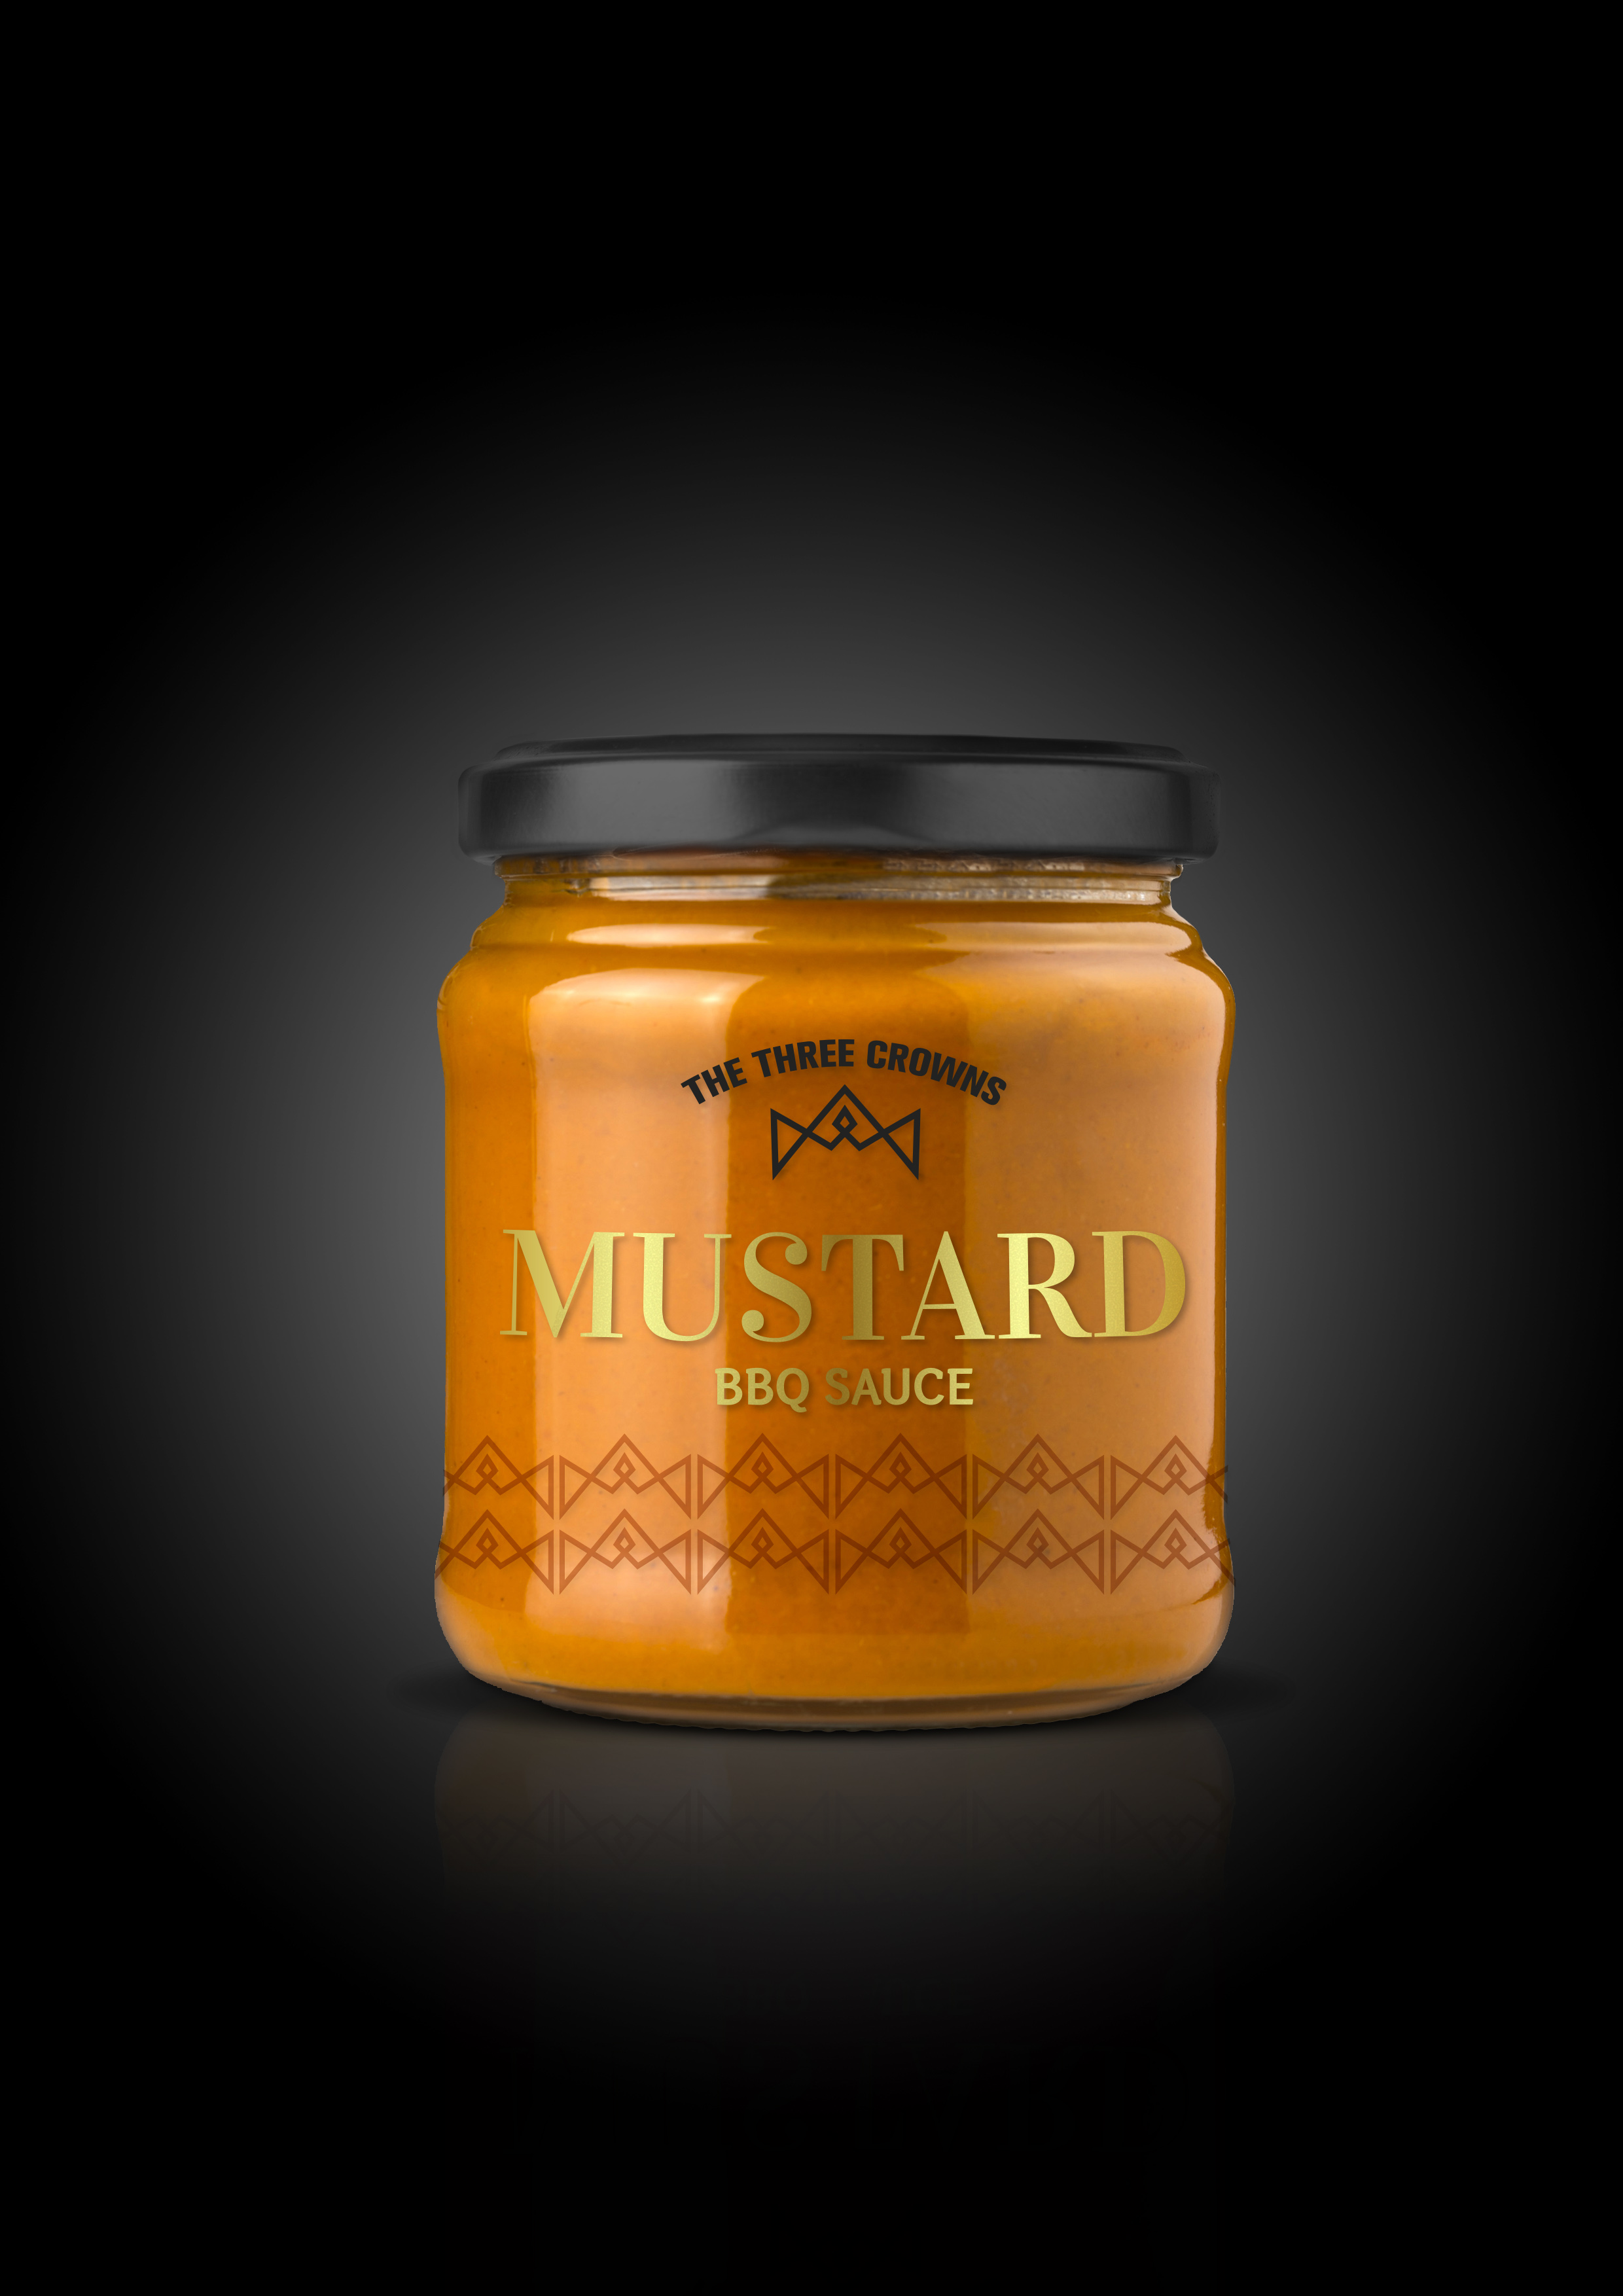 Brand and Premium Packaging Design Concept for a Mustard